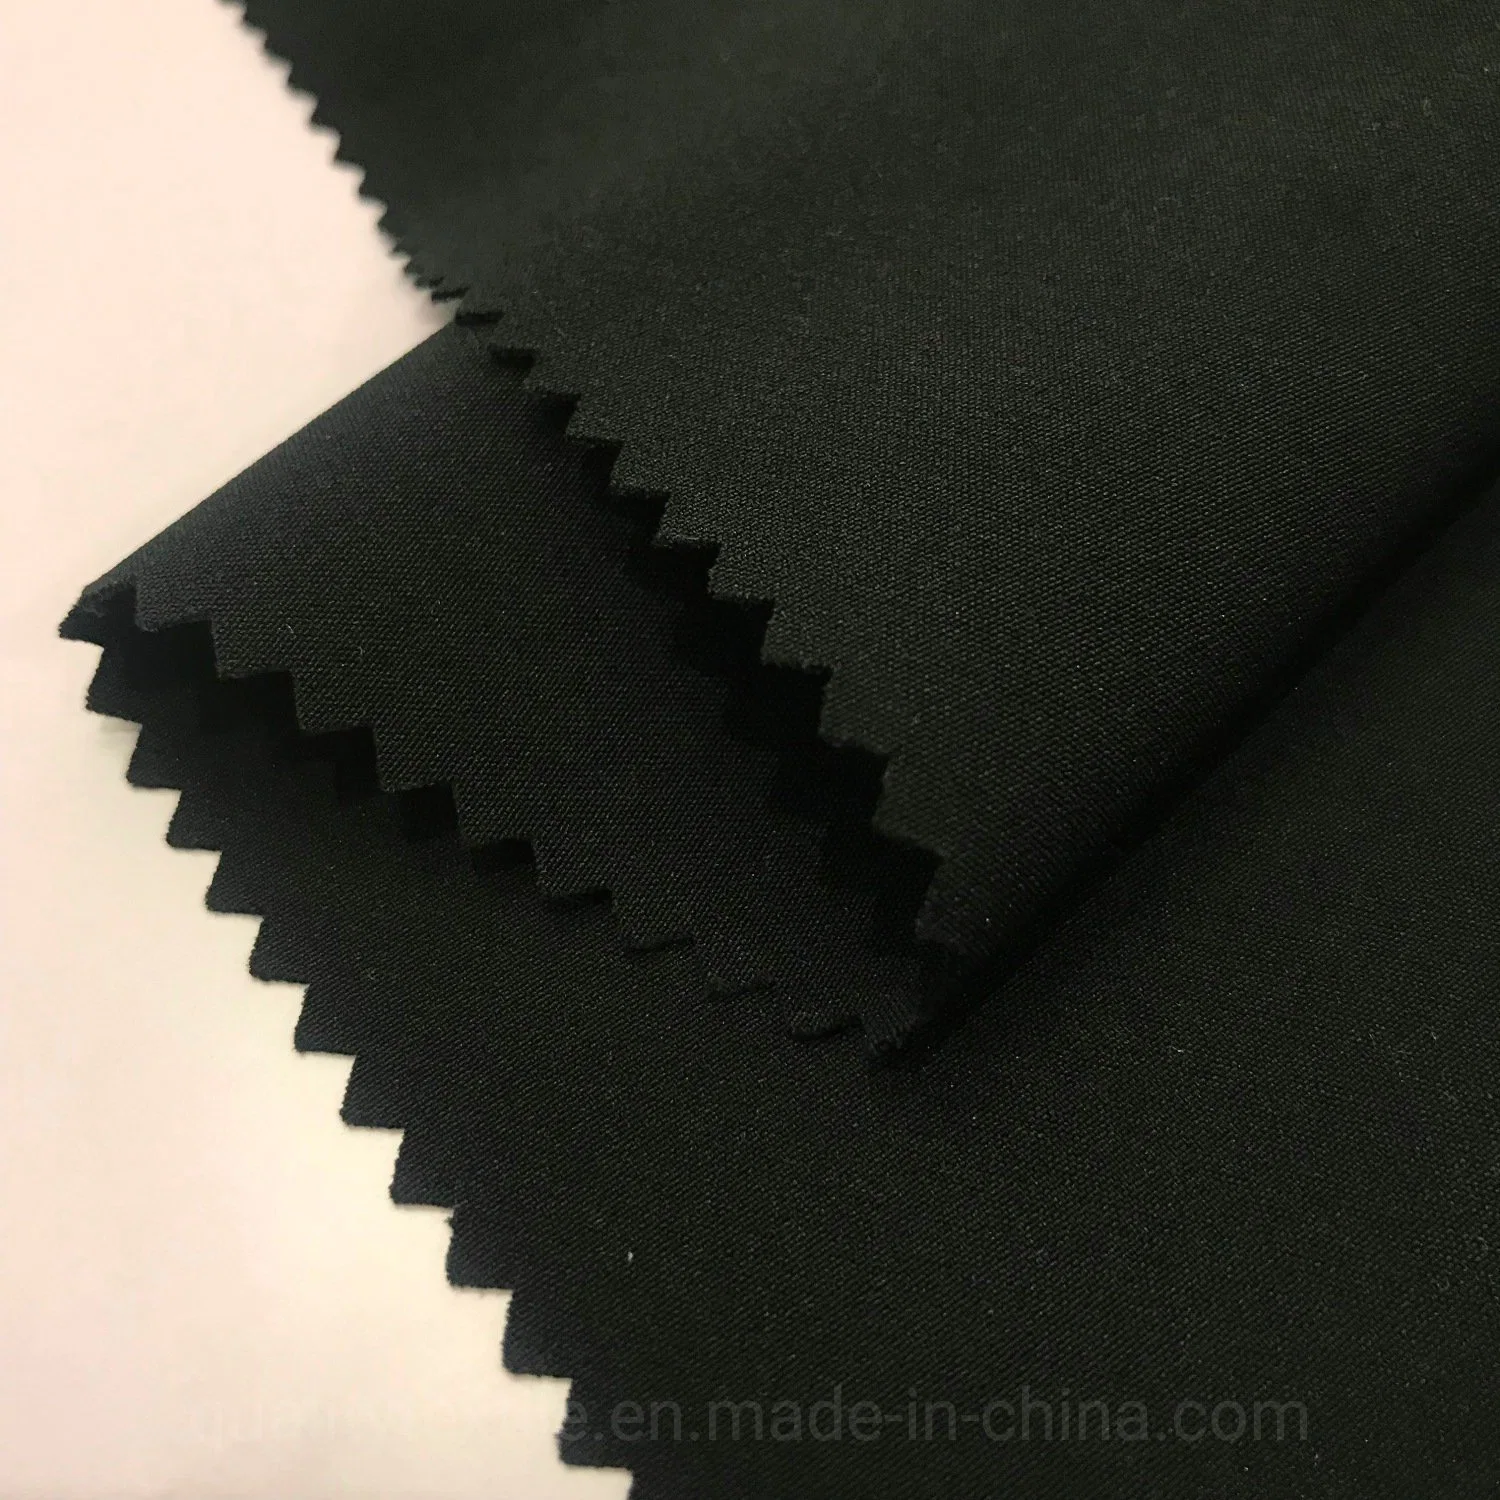 Woven 86%Polyester 14% Spandex/Stretch Fabric for Sportswear Garment Textile